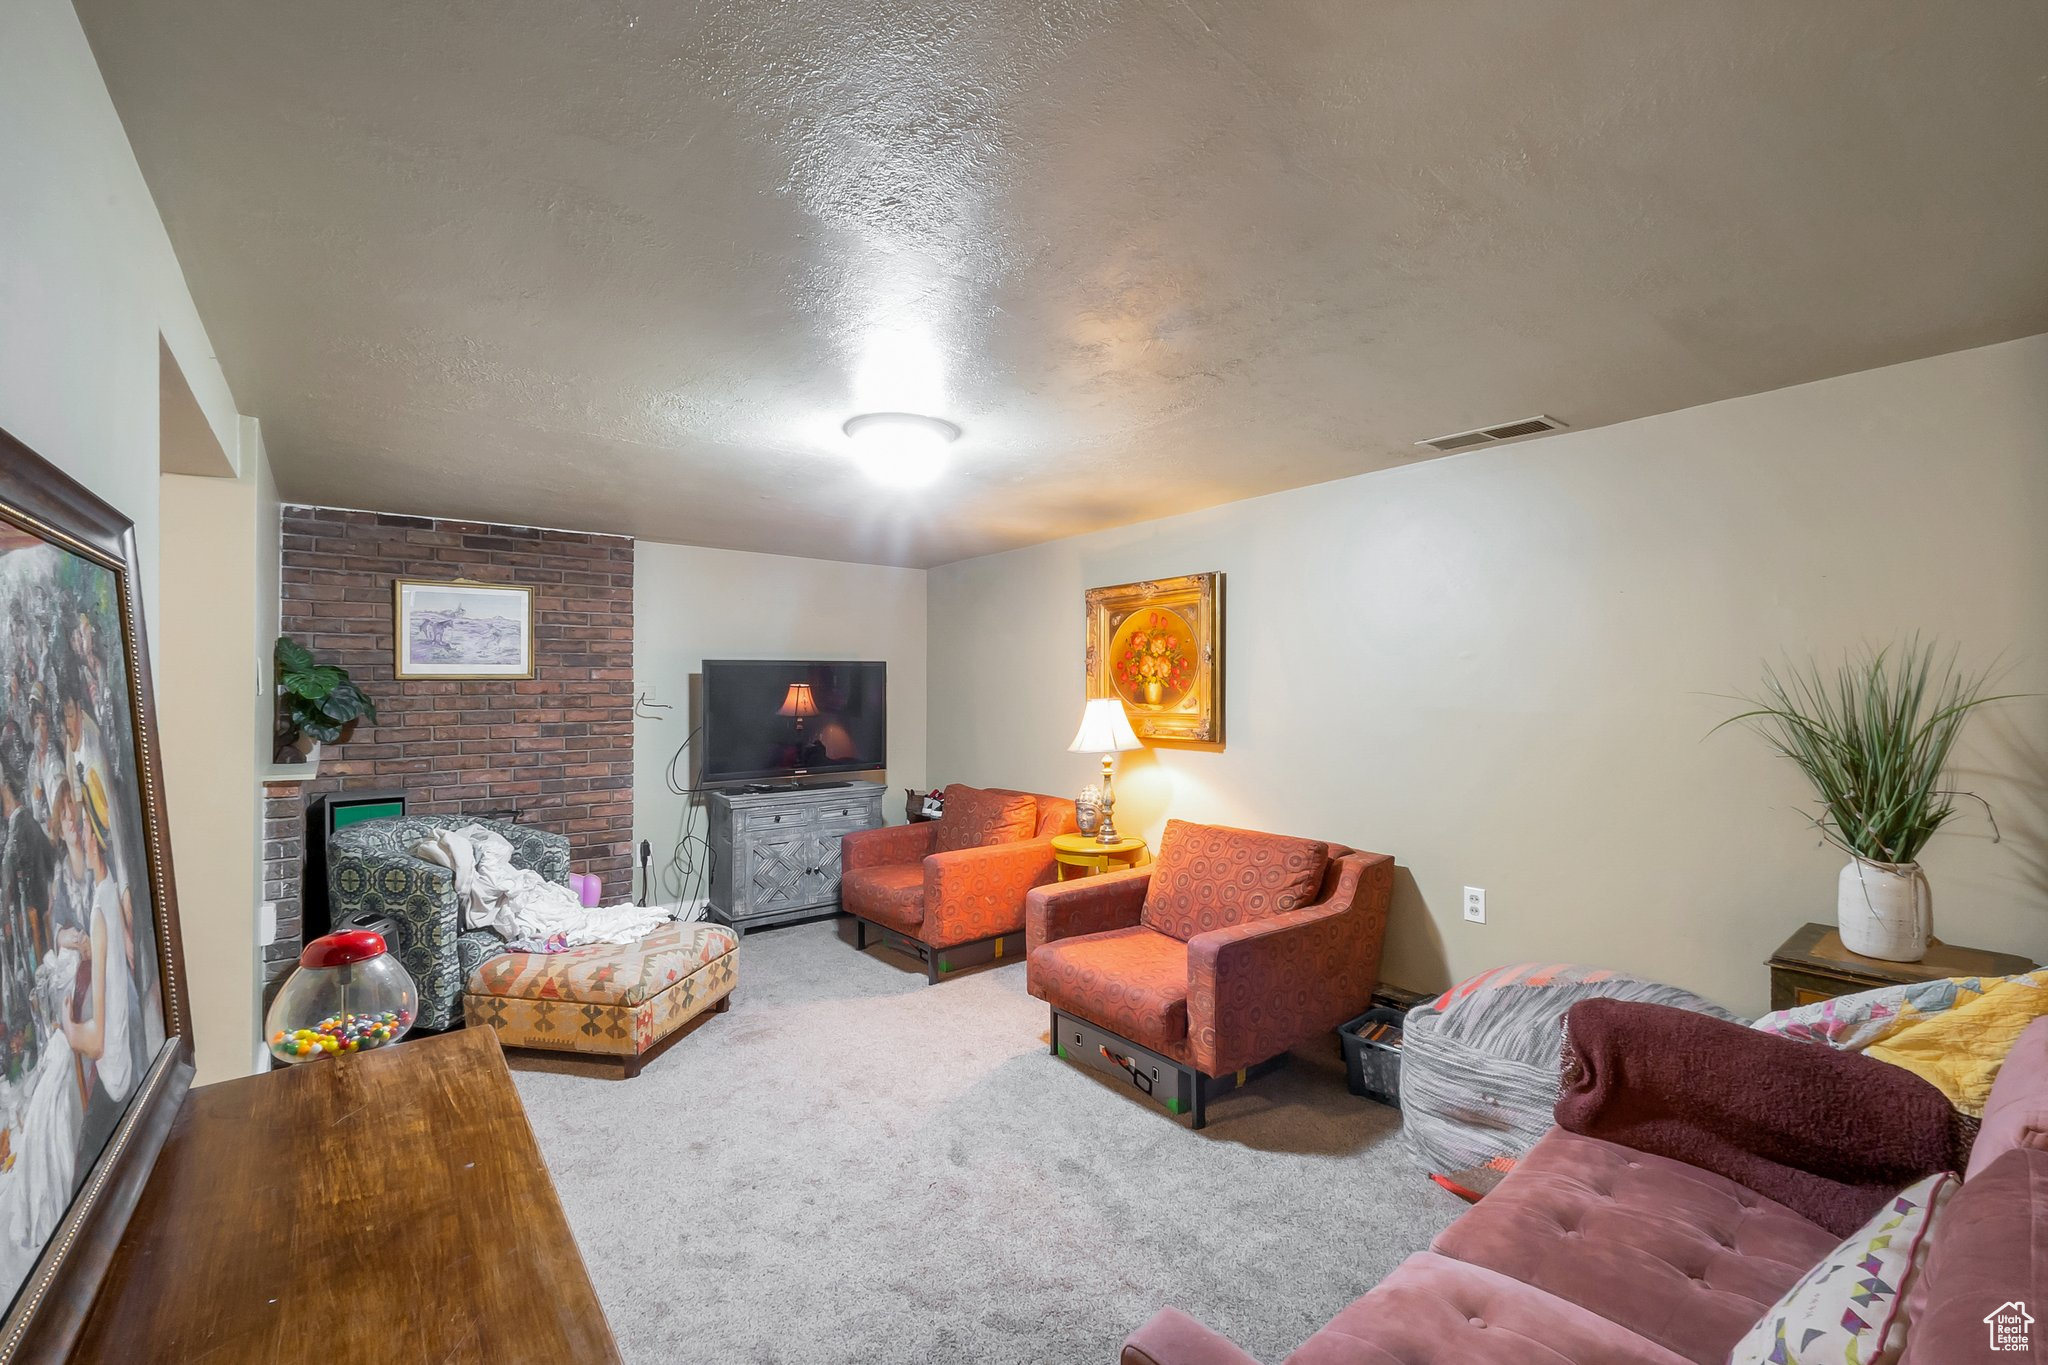 Basement family room with carpet and brick fireplace